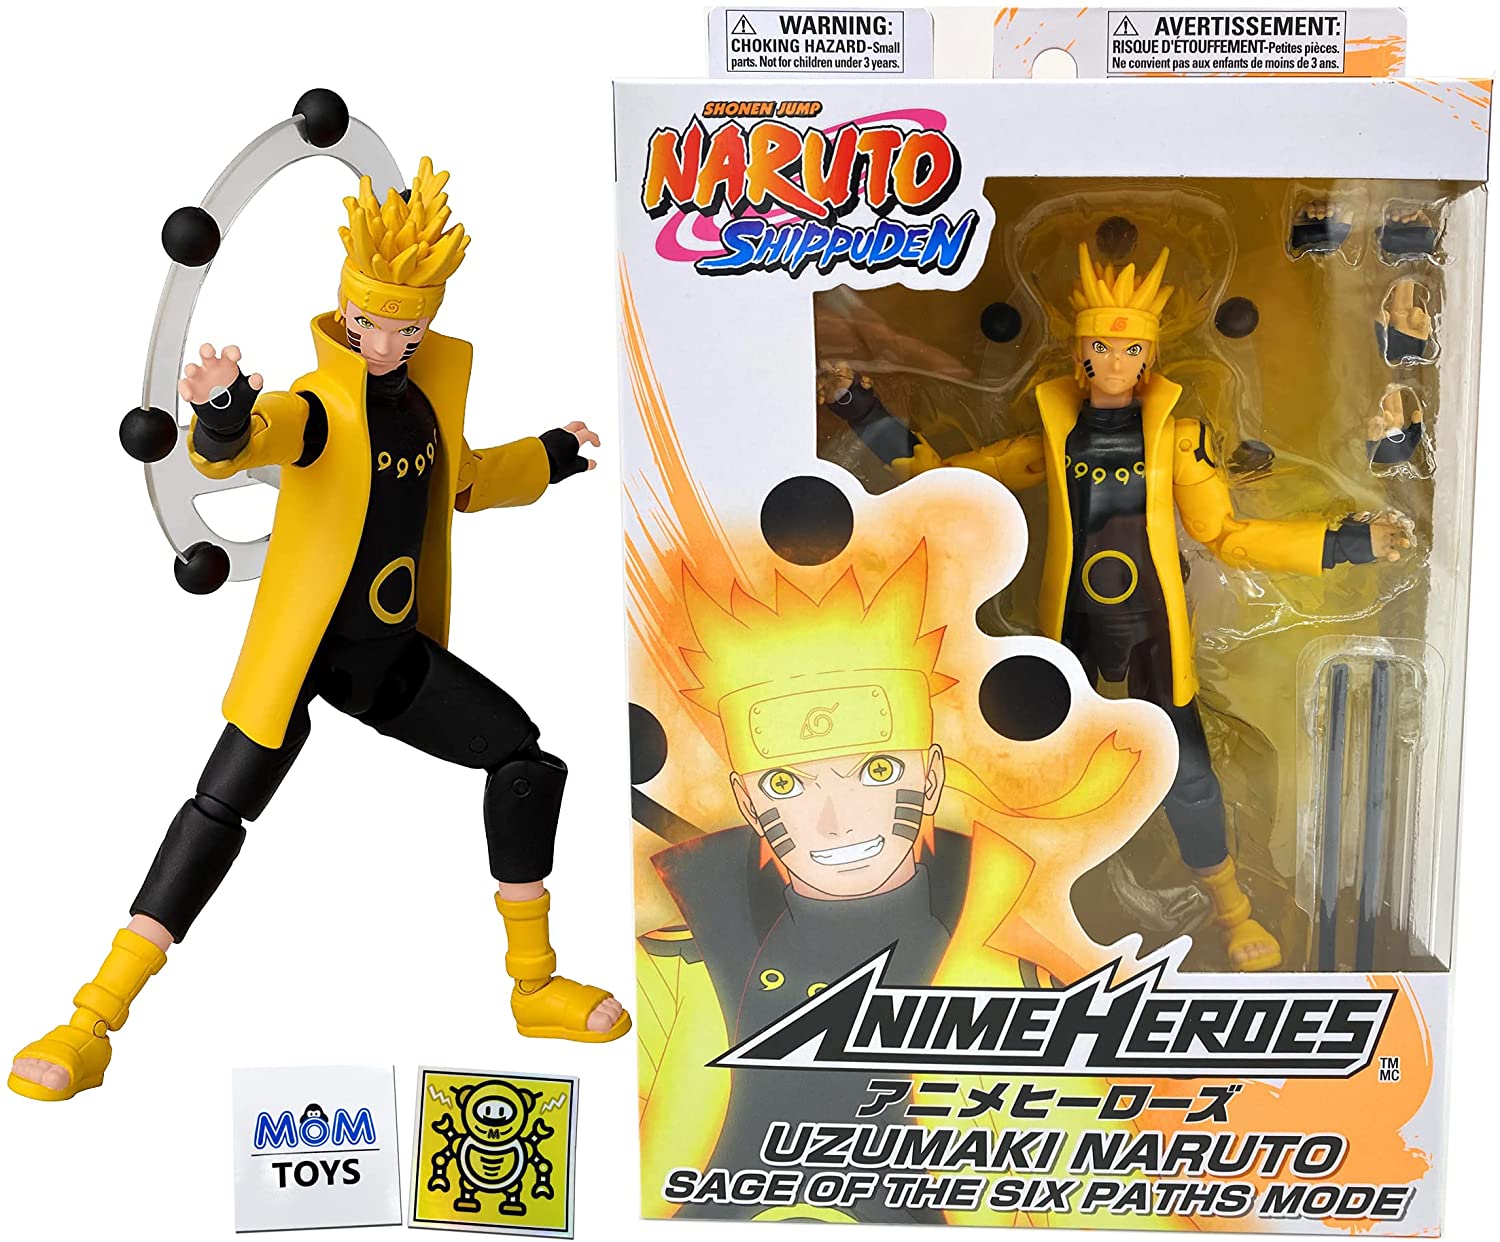 Bandai Naruto Anime Heroes Naruto Uzumaki Naruto Sage of Six Paths Toy Action Figure Toy Bundle with 2 My Outlet Mall Stickers